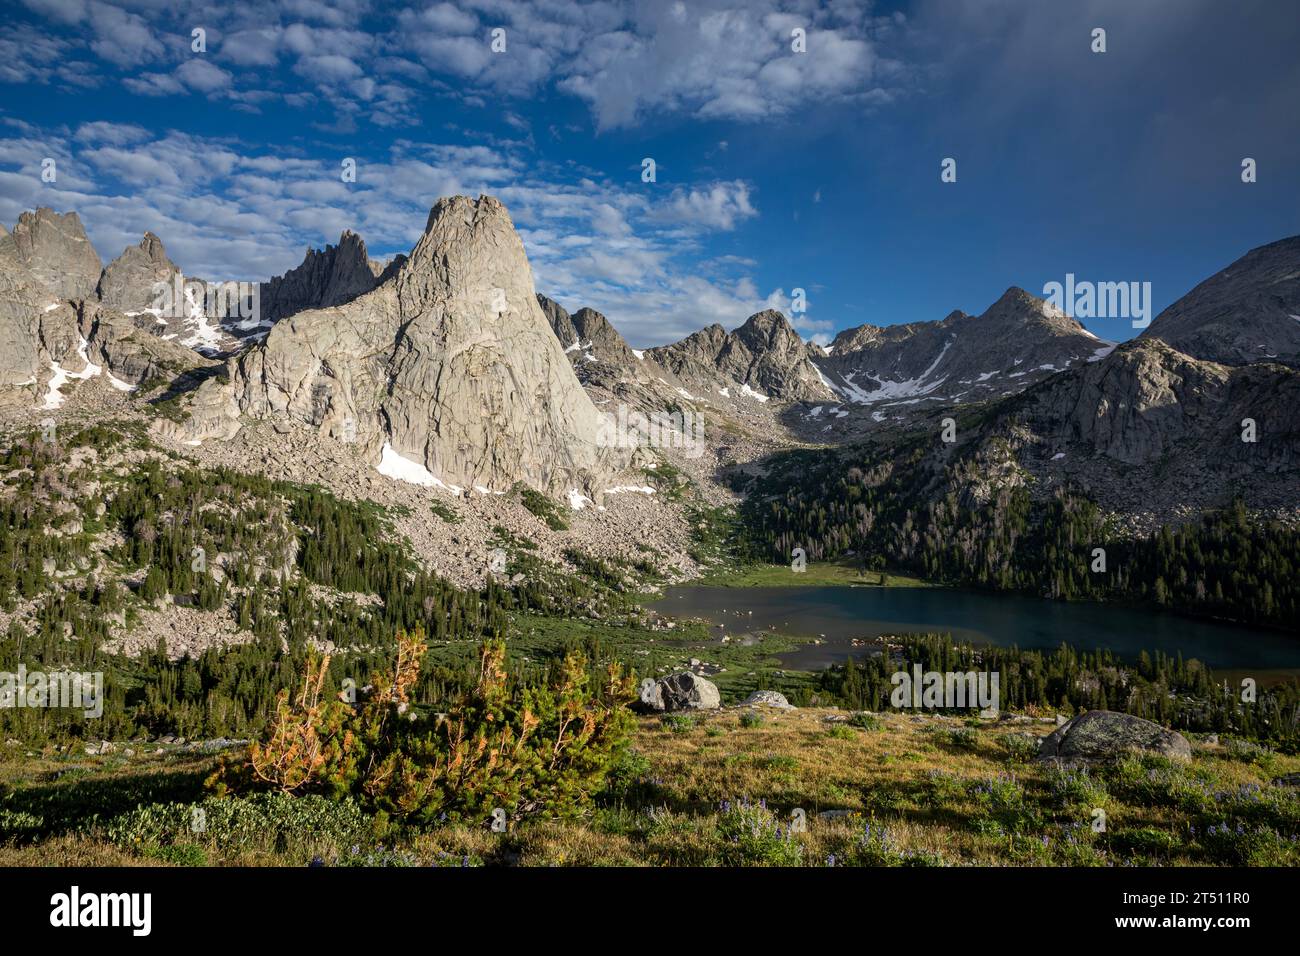 WY05595-00...WYOMING - Pingora Peak in Cirque of the Towers and Lonesome Lake in the Popo Agie Wilderness area of the Wind River Range. Stock Photo